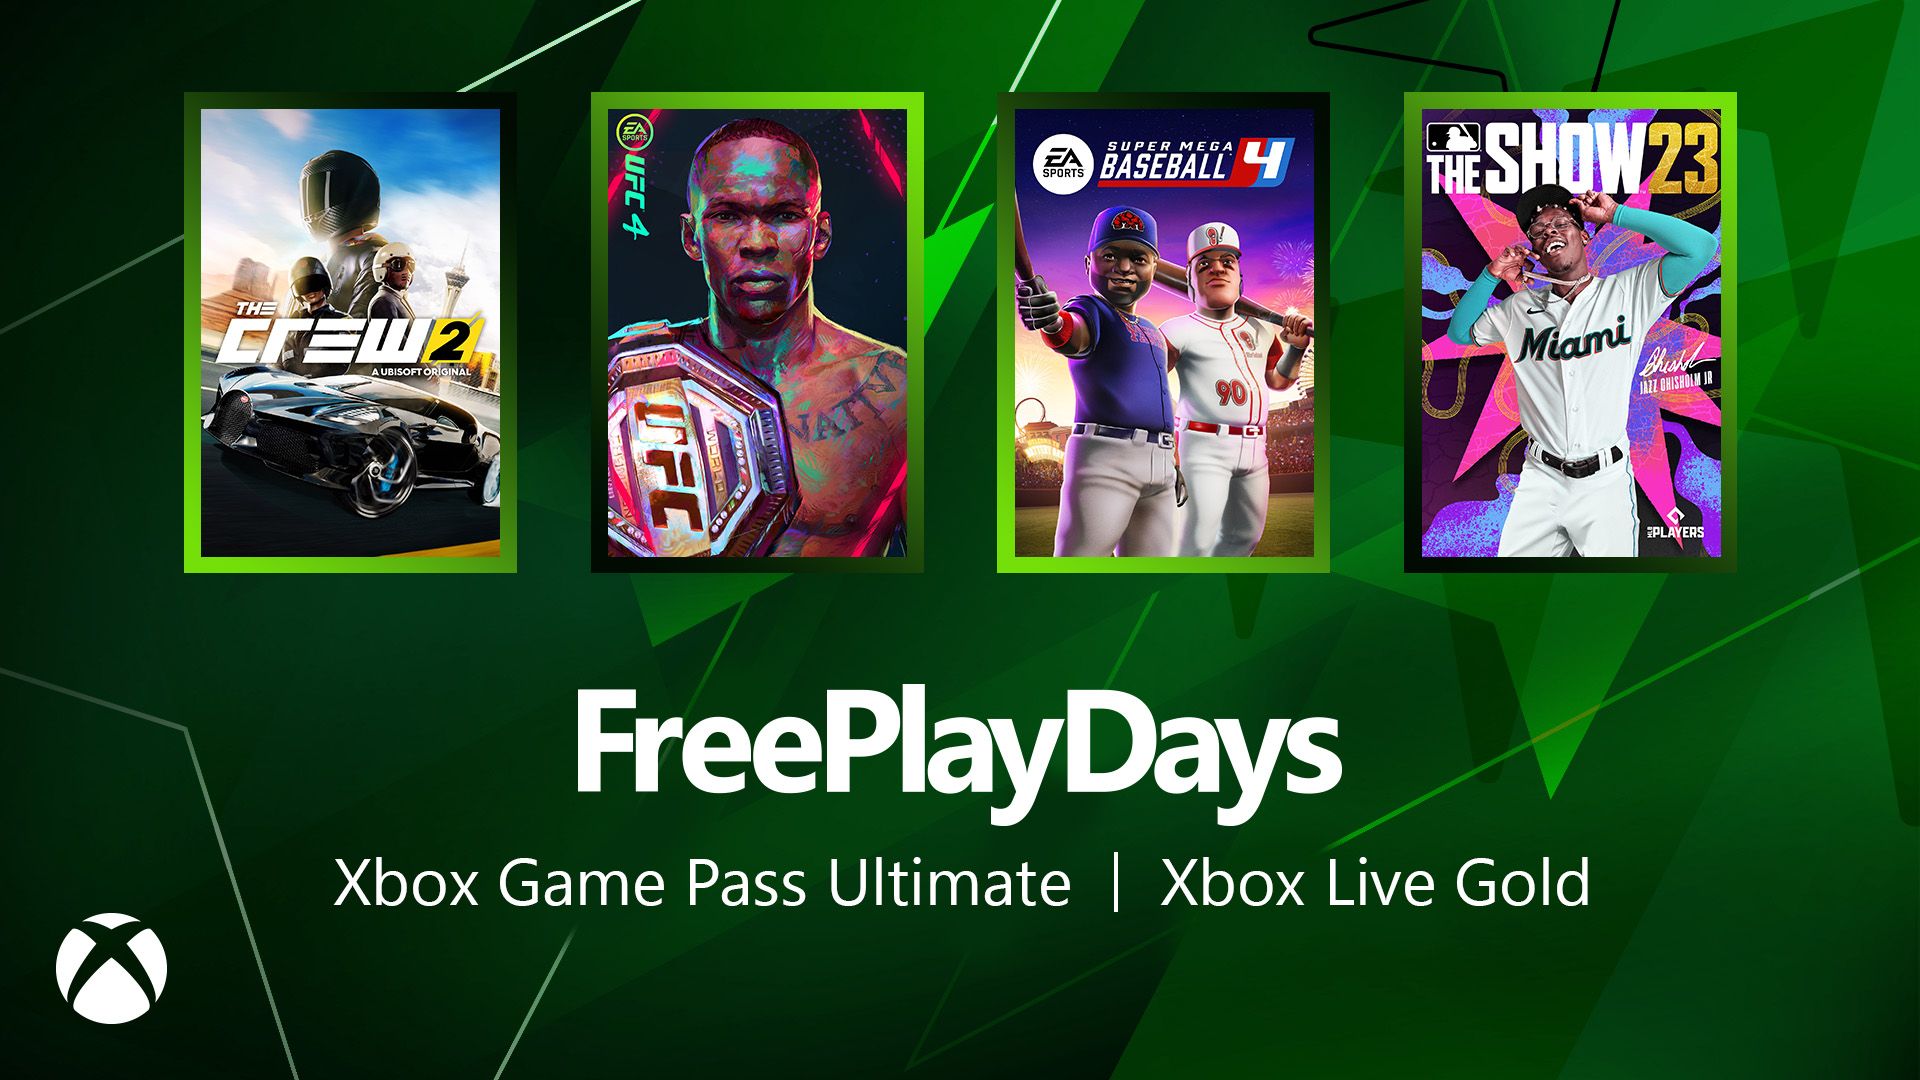 Free Play Days – The Crew 2, UFC 4, Super Mega Baseball 4, and MLB The Show 23